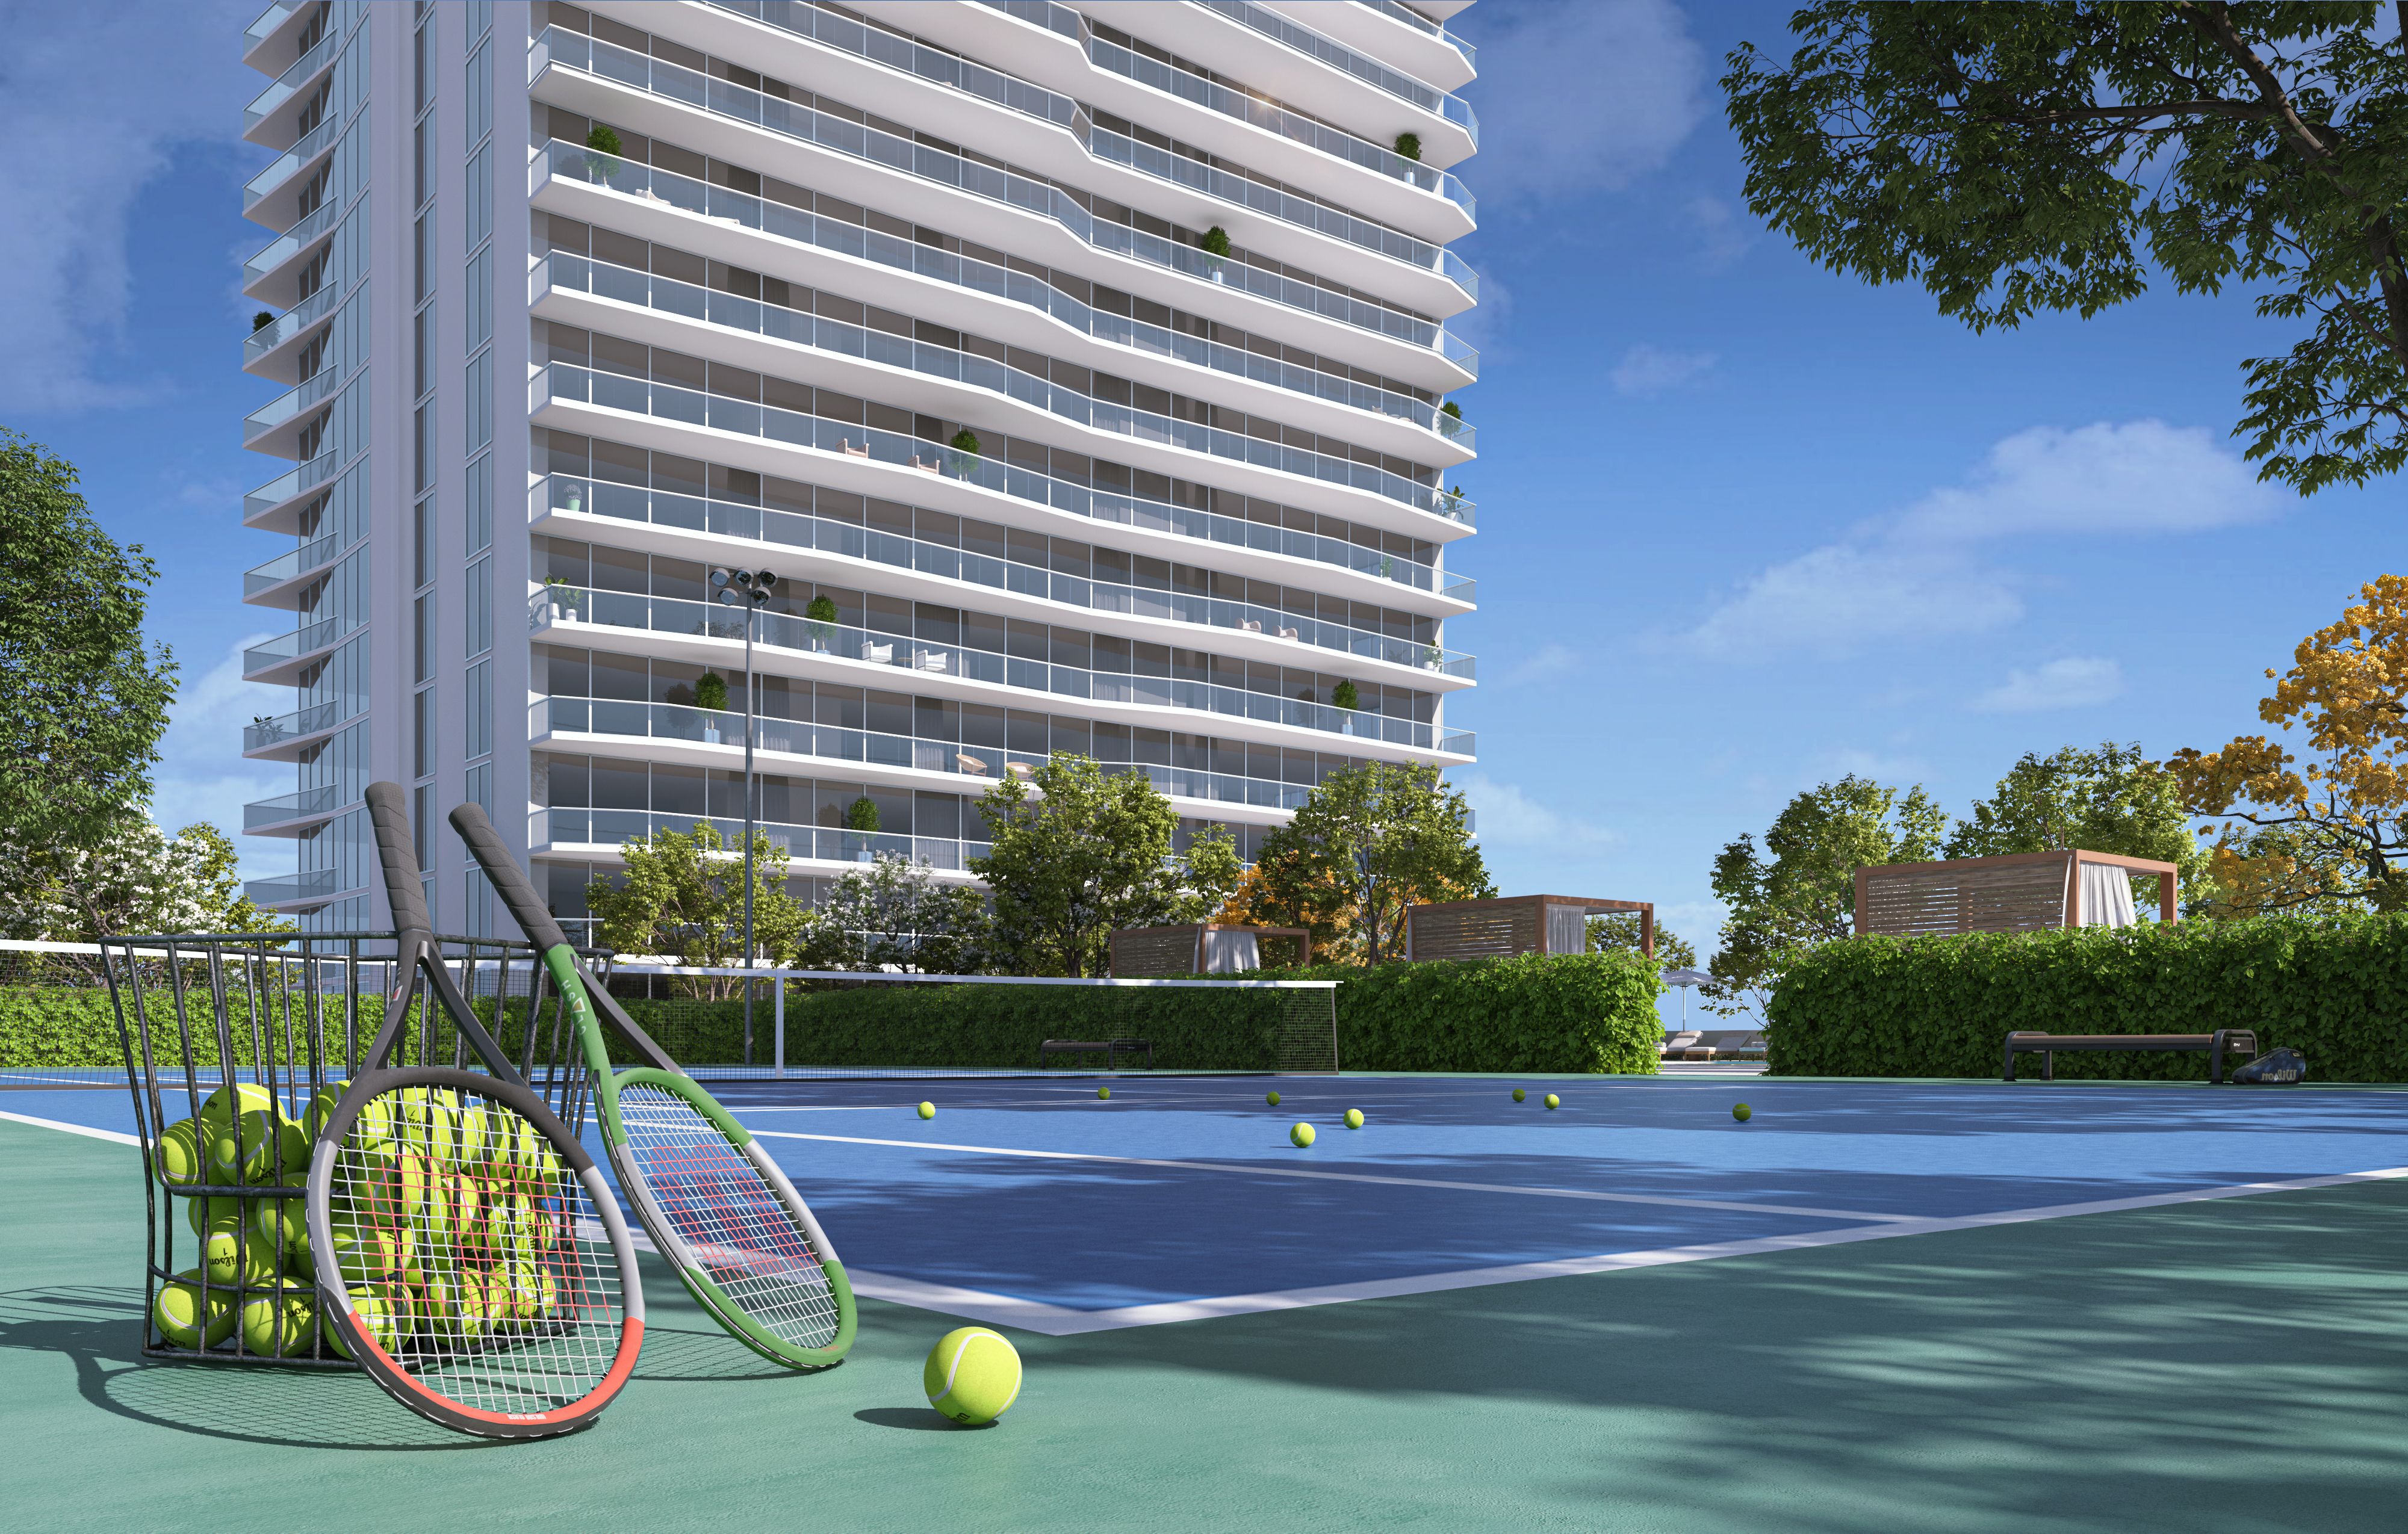 In the foreground, two tennis racquets lean against a basket of tennis balls. In the foreground, a tennis court and first seven floors of Tower II.